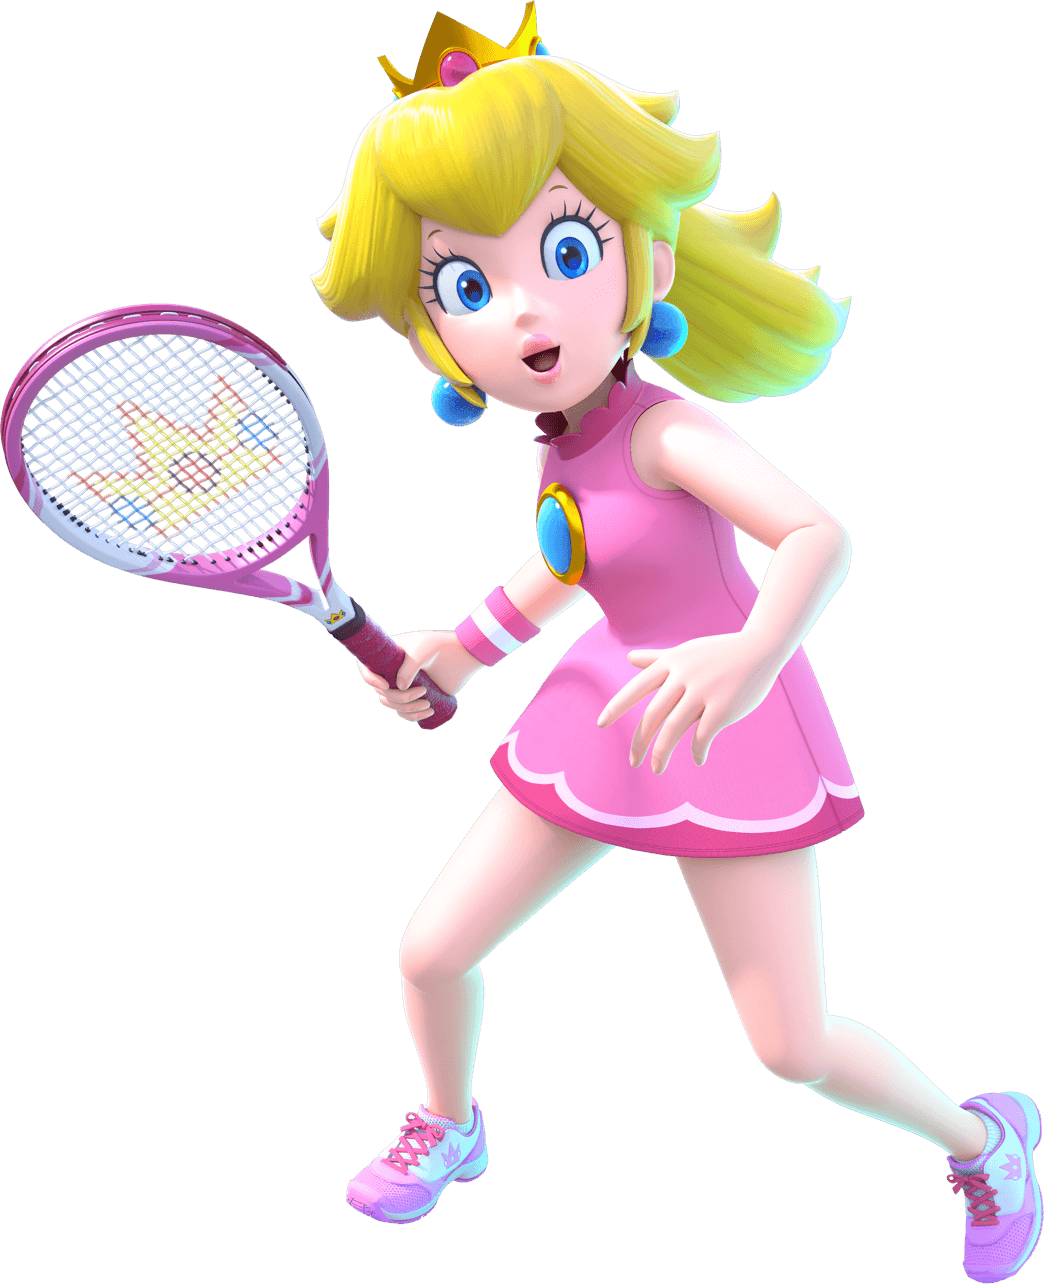 Download PNG image - Mario Tennis Aces PNG File 